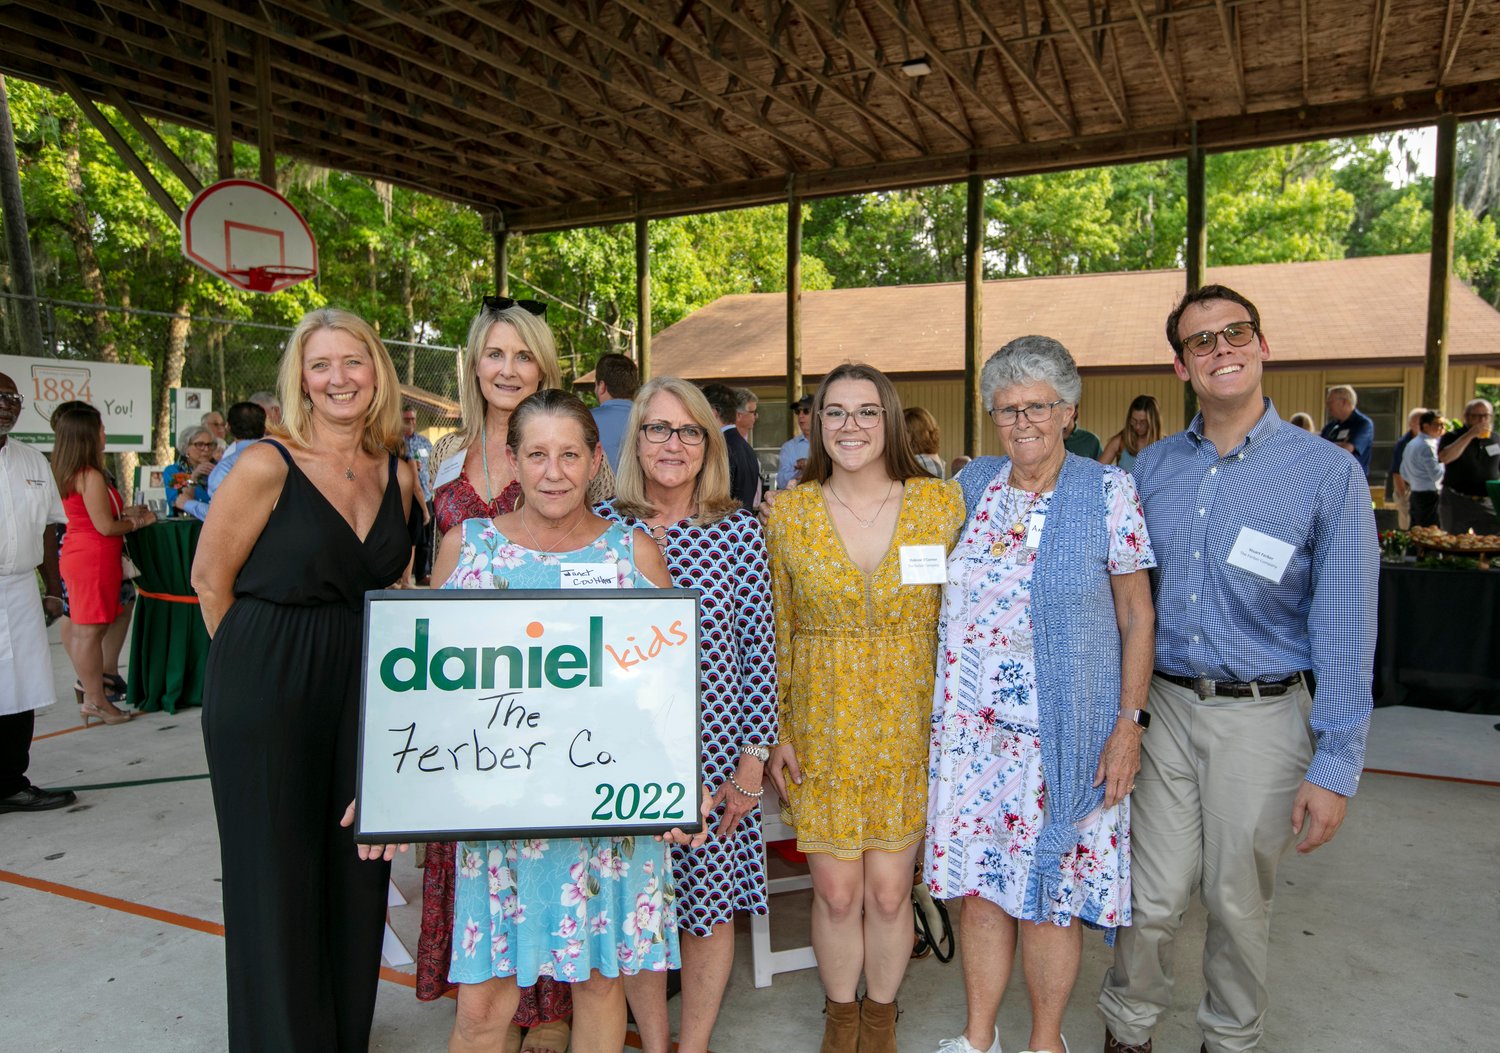 Angi Palmieri, Stacey Starsiak, Janet Coulther, Mindy Sigle, ShiAnne O’Connor, Annie Cuneo and Stuart Ferber, all representing The Ferber Company, gather for a photo during the recent 1884 Giving Society event, which benefits Daniel.